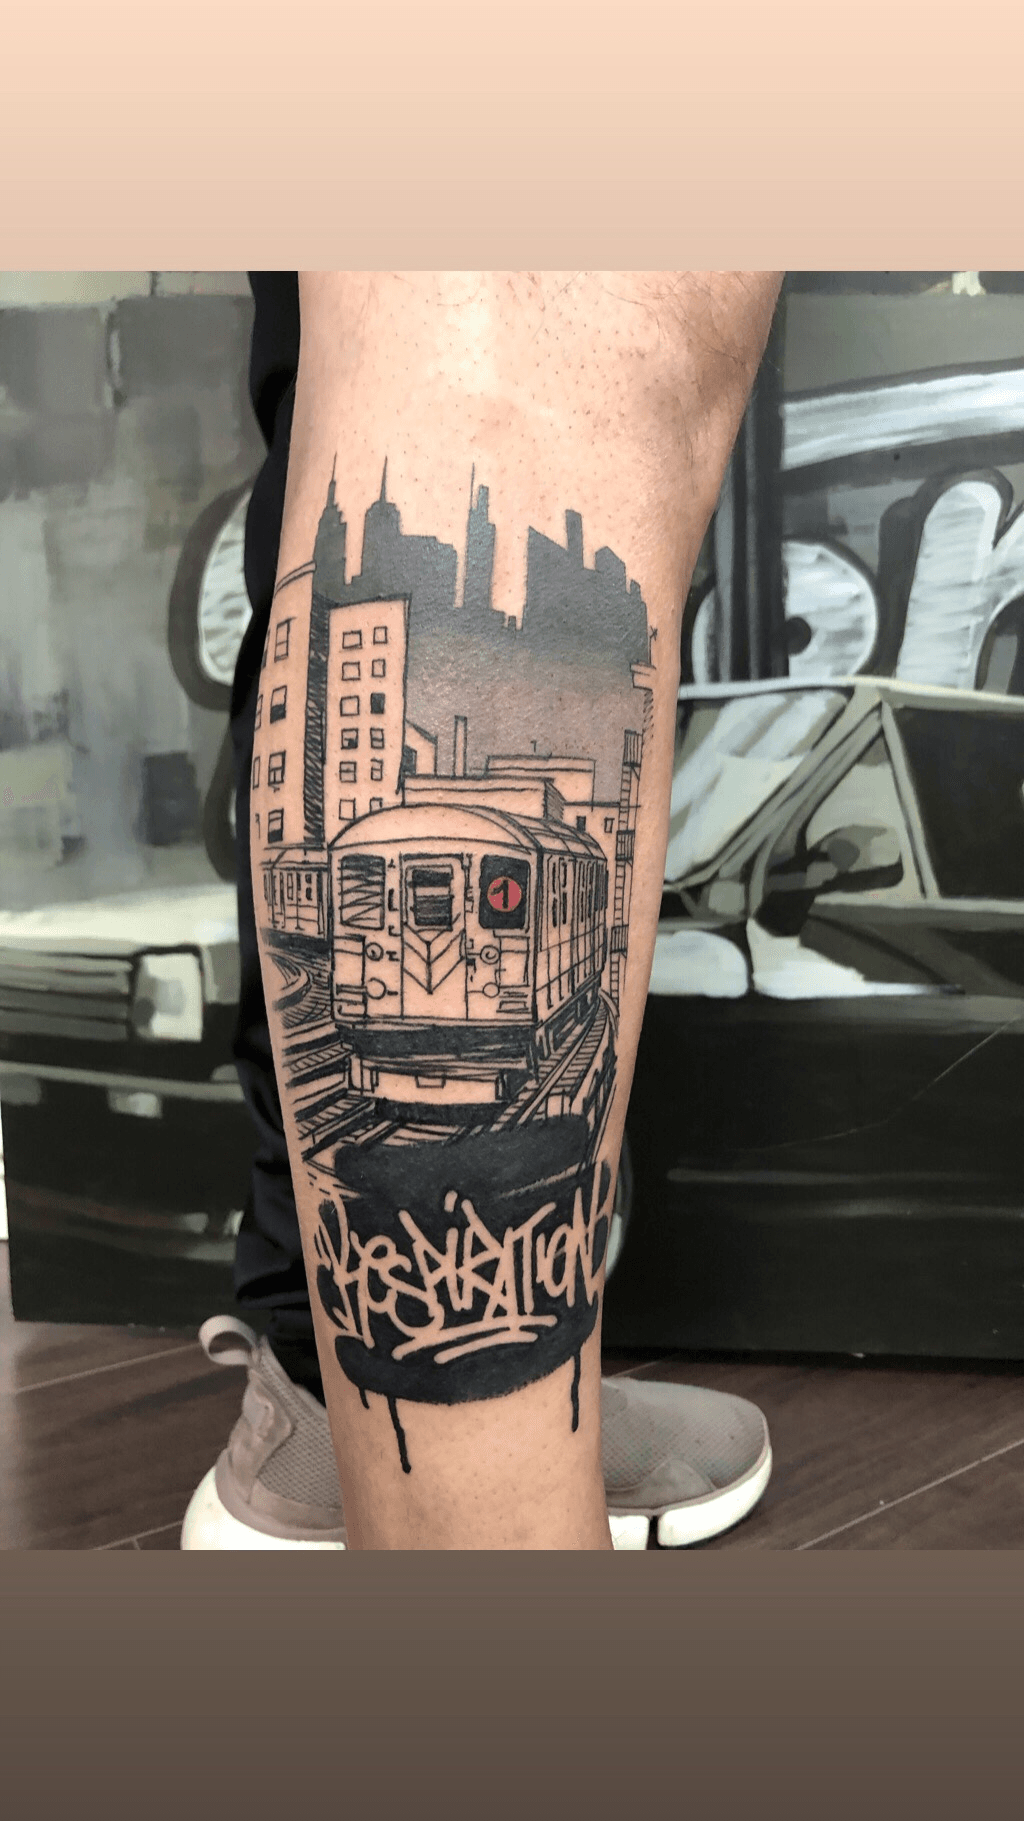 Best tattoo spotted on the NYC subway this morning  rIan